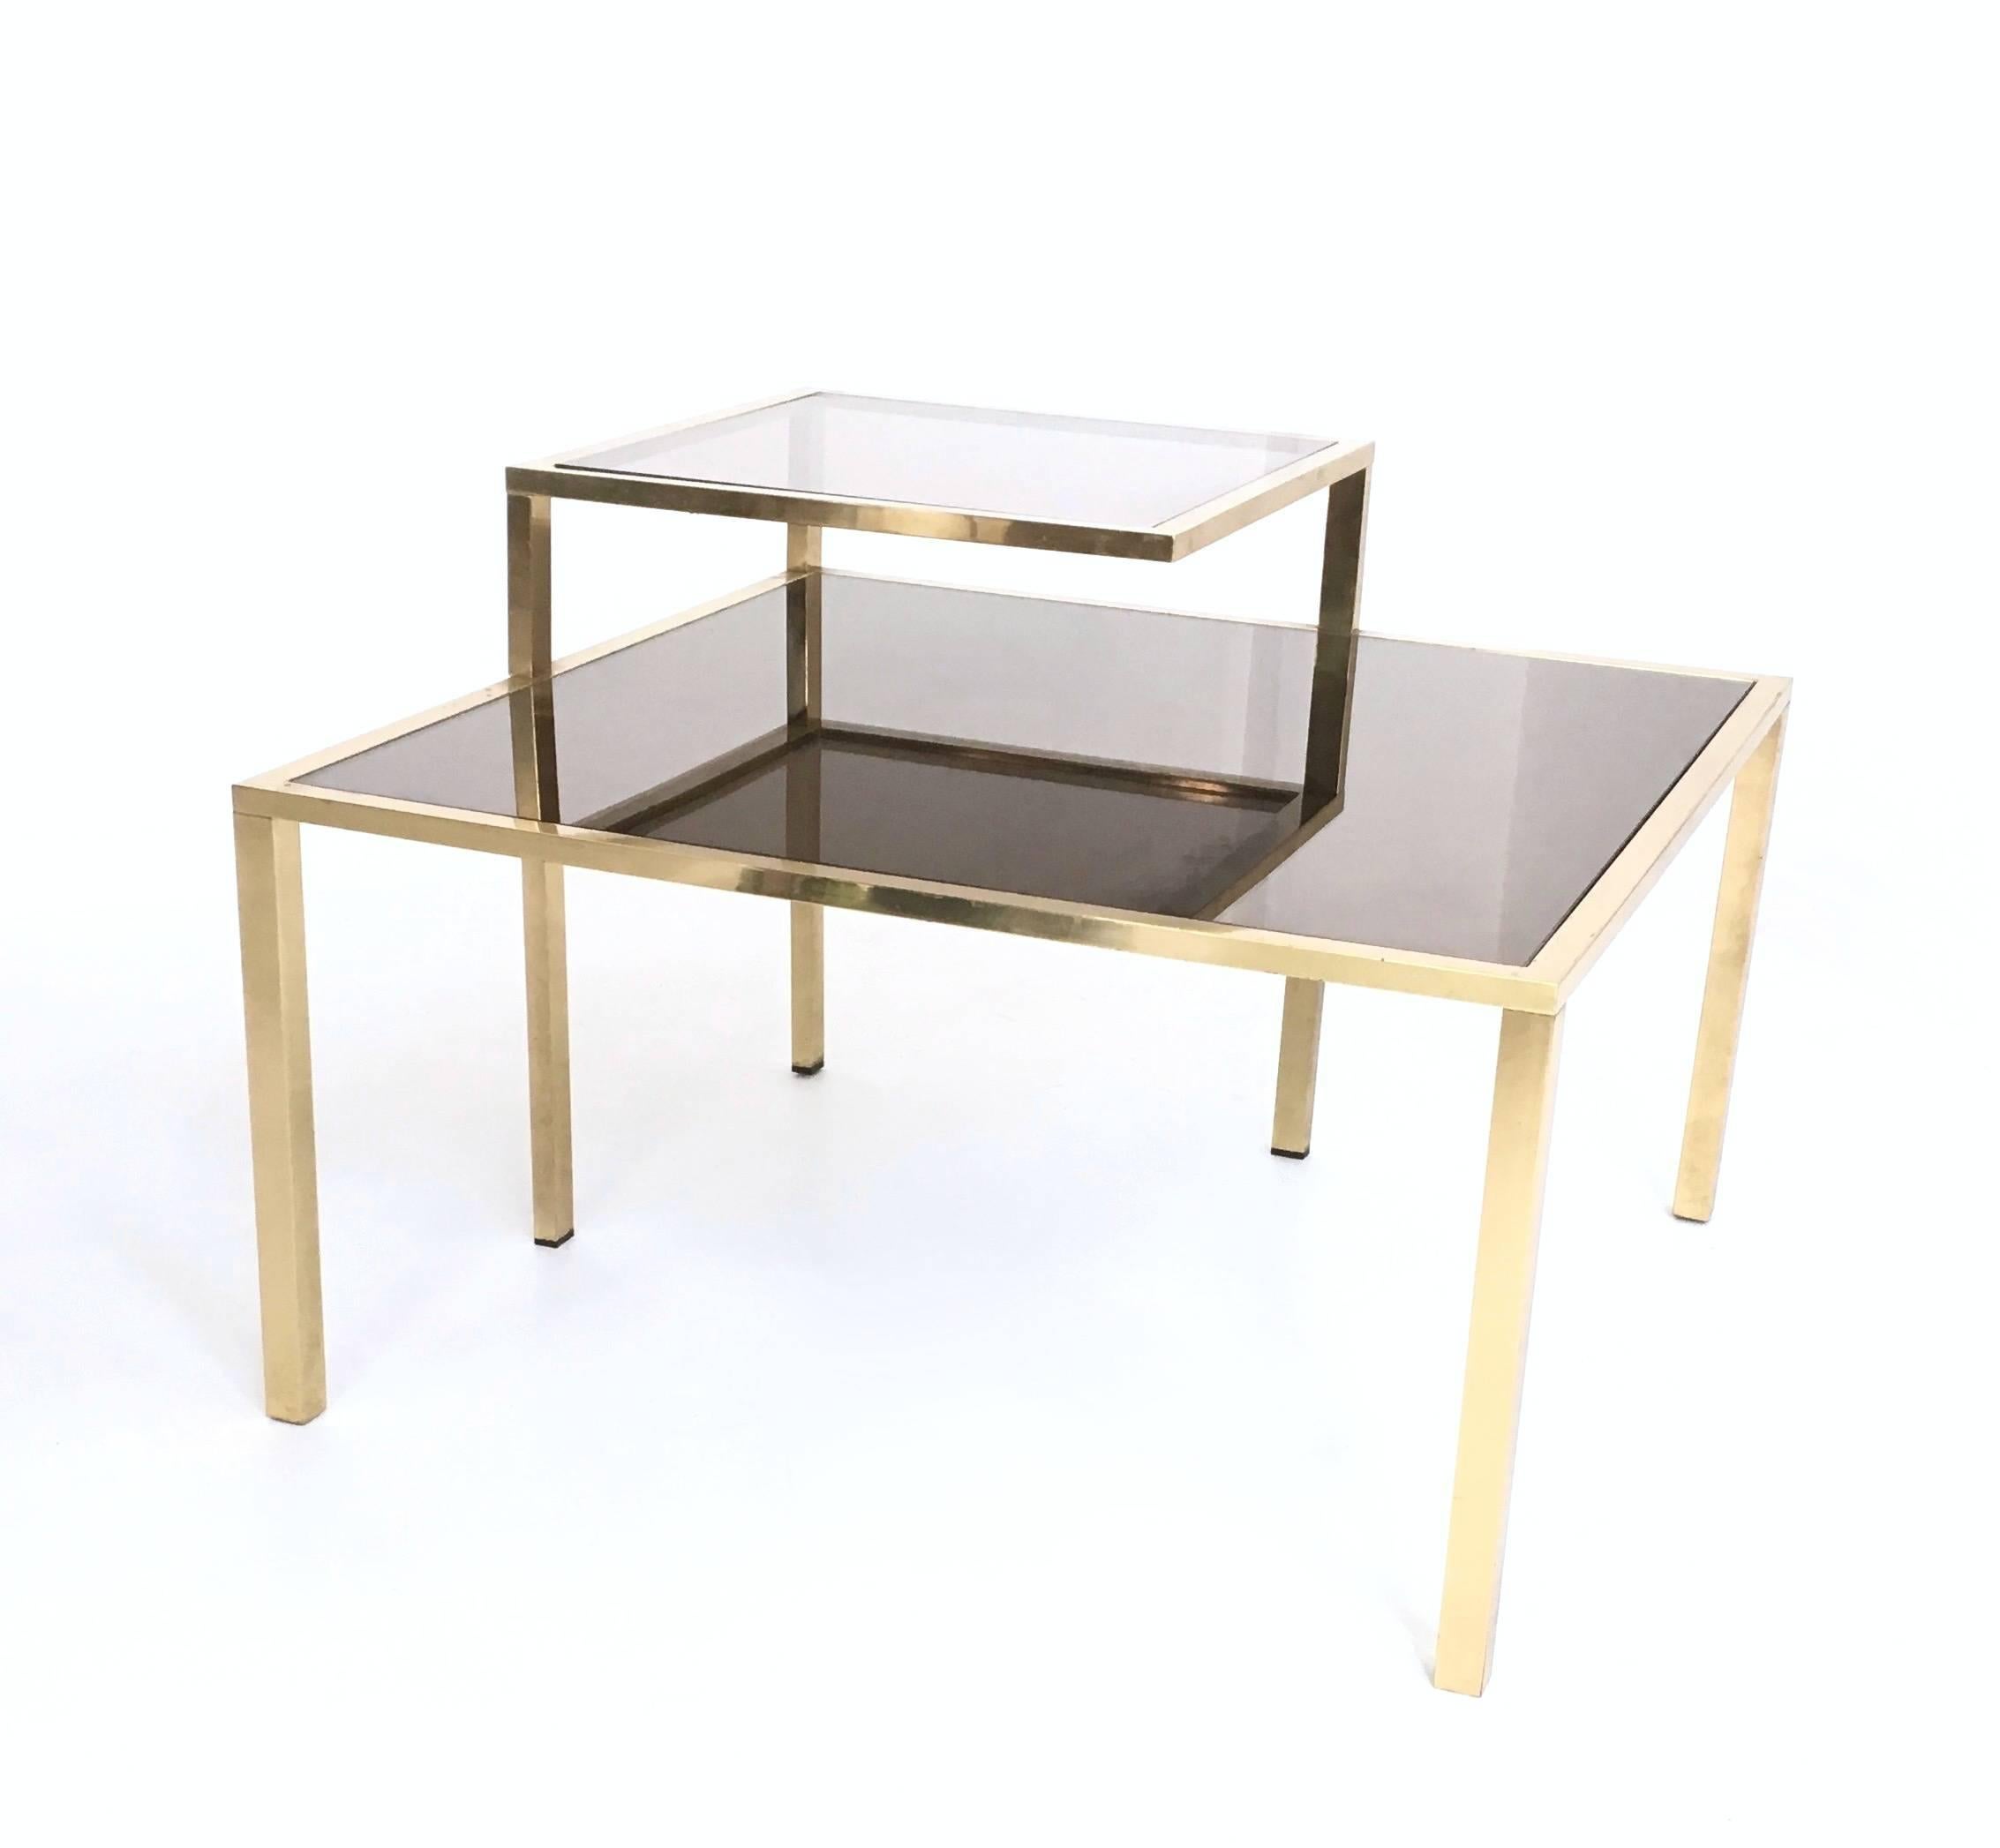 Minimalist Postmodern Square Brass Coffee Table with Glass Shelf and Mirrored Top, Italy For Sale